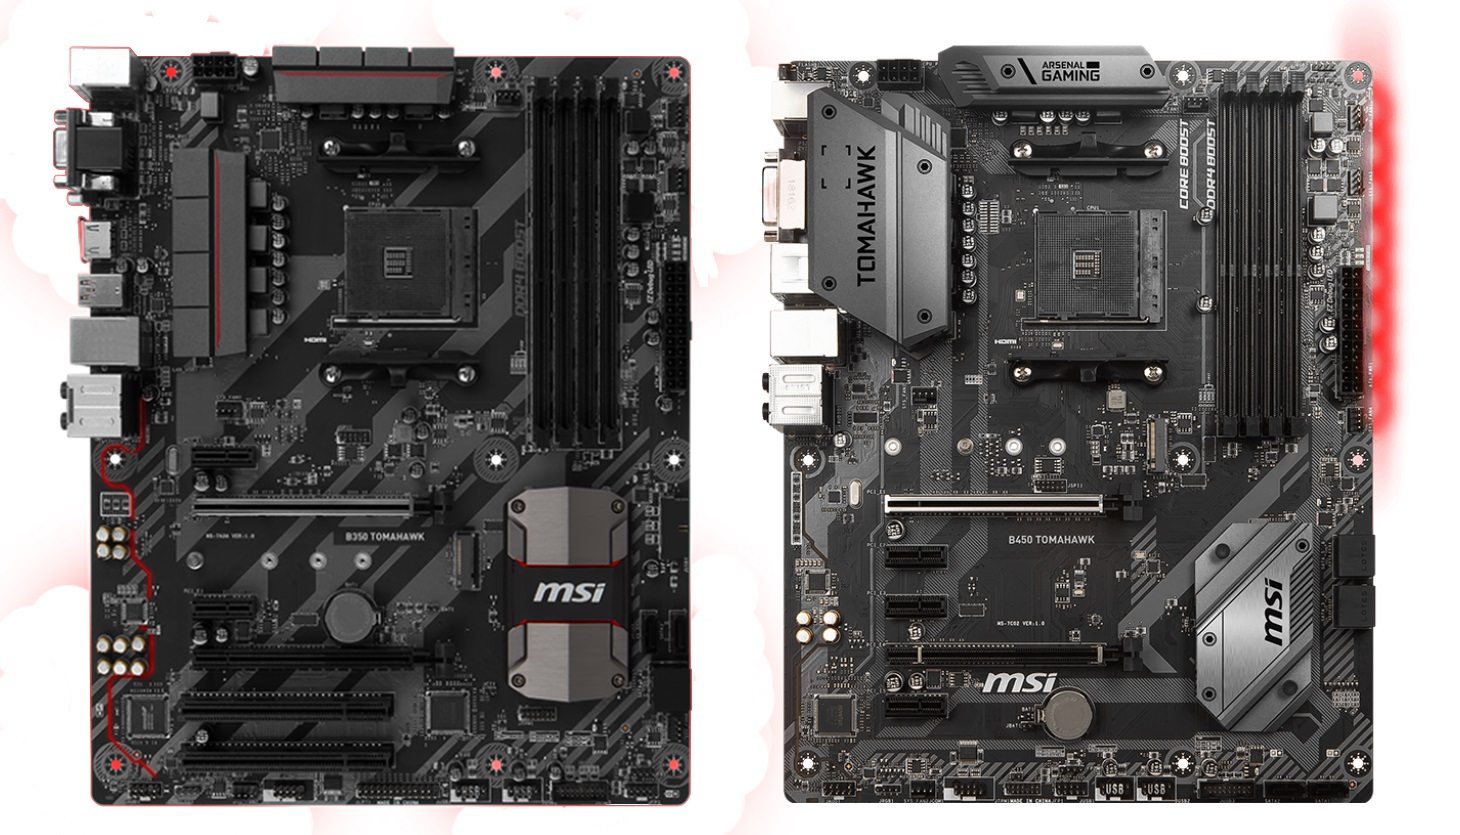 The MSI Tomahawk Motherboard More Than Axe